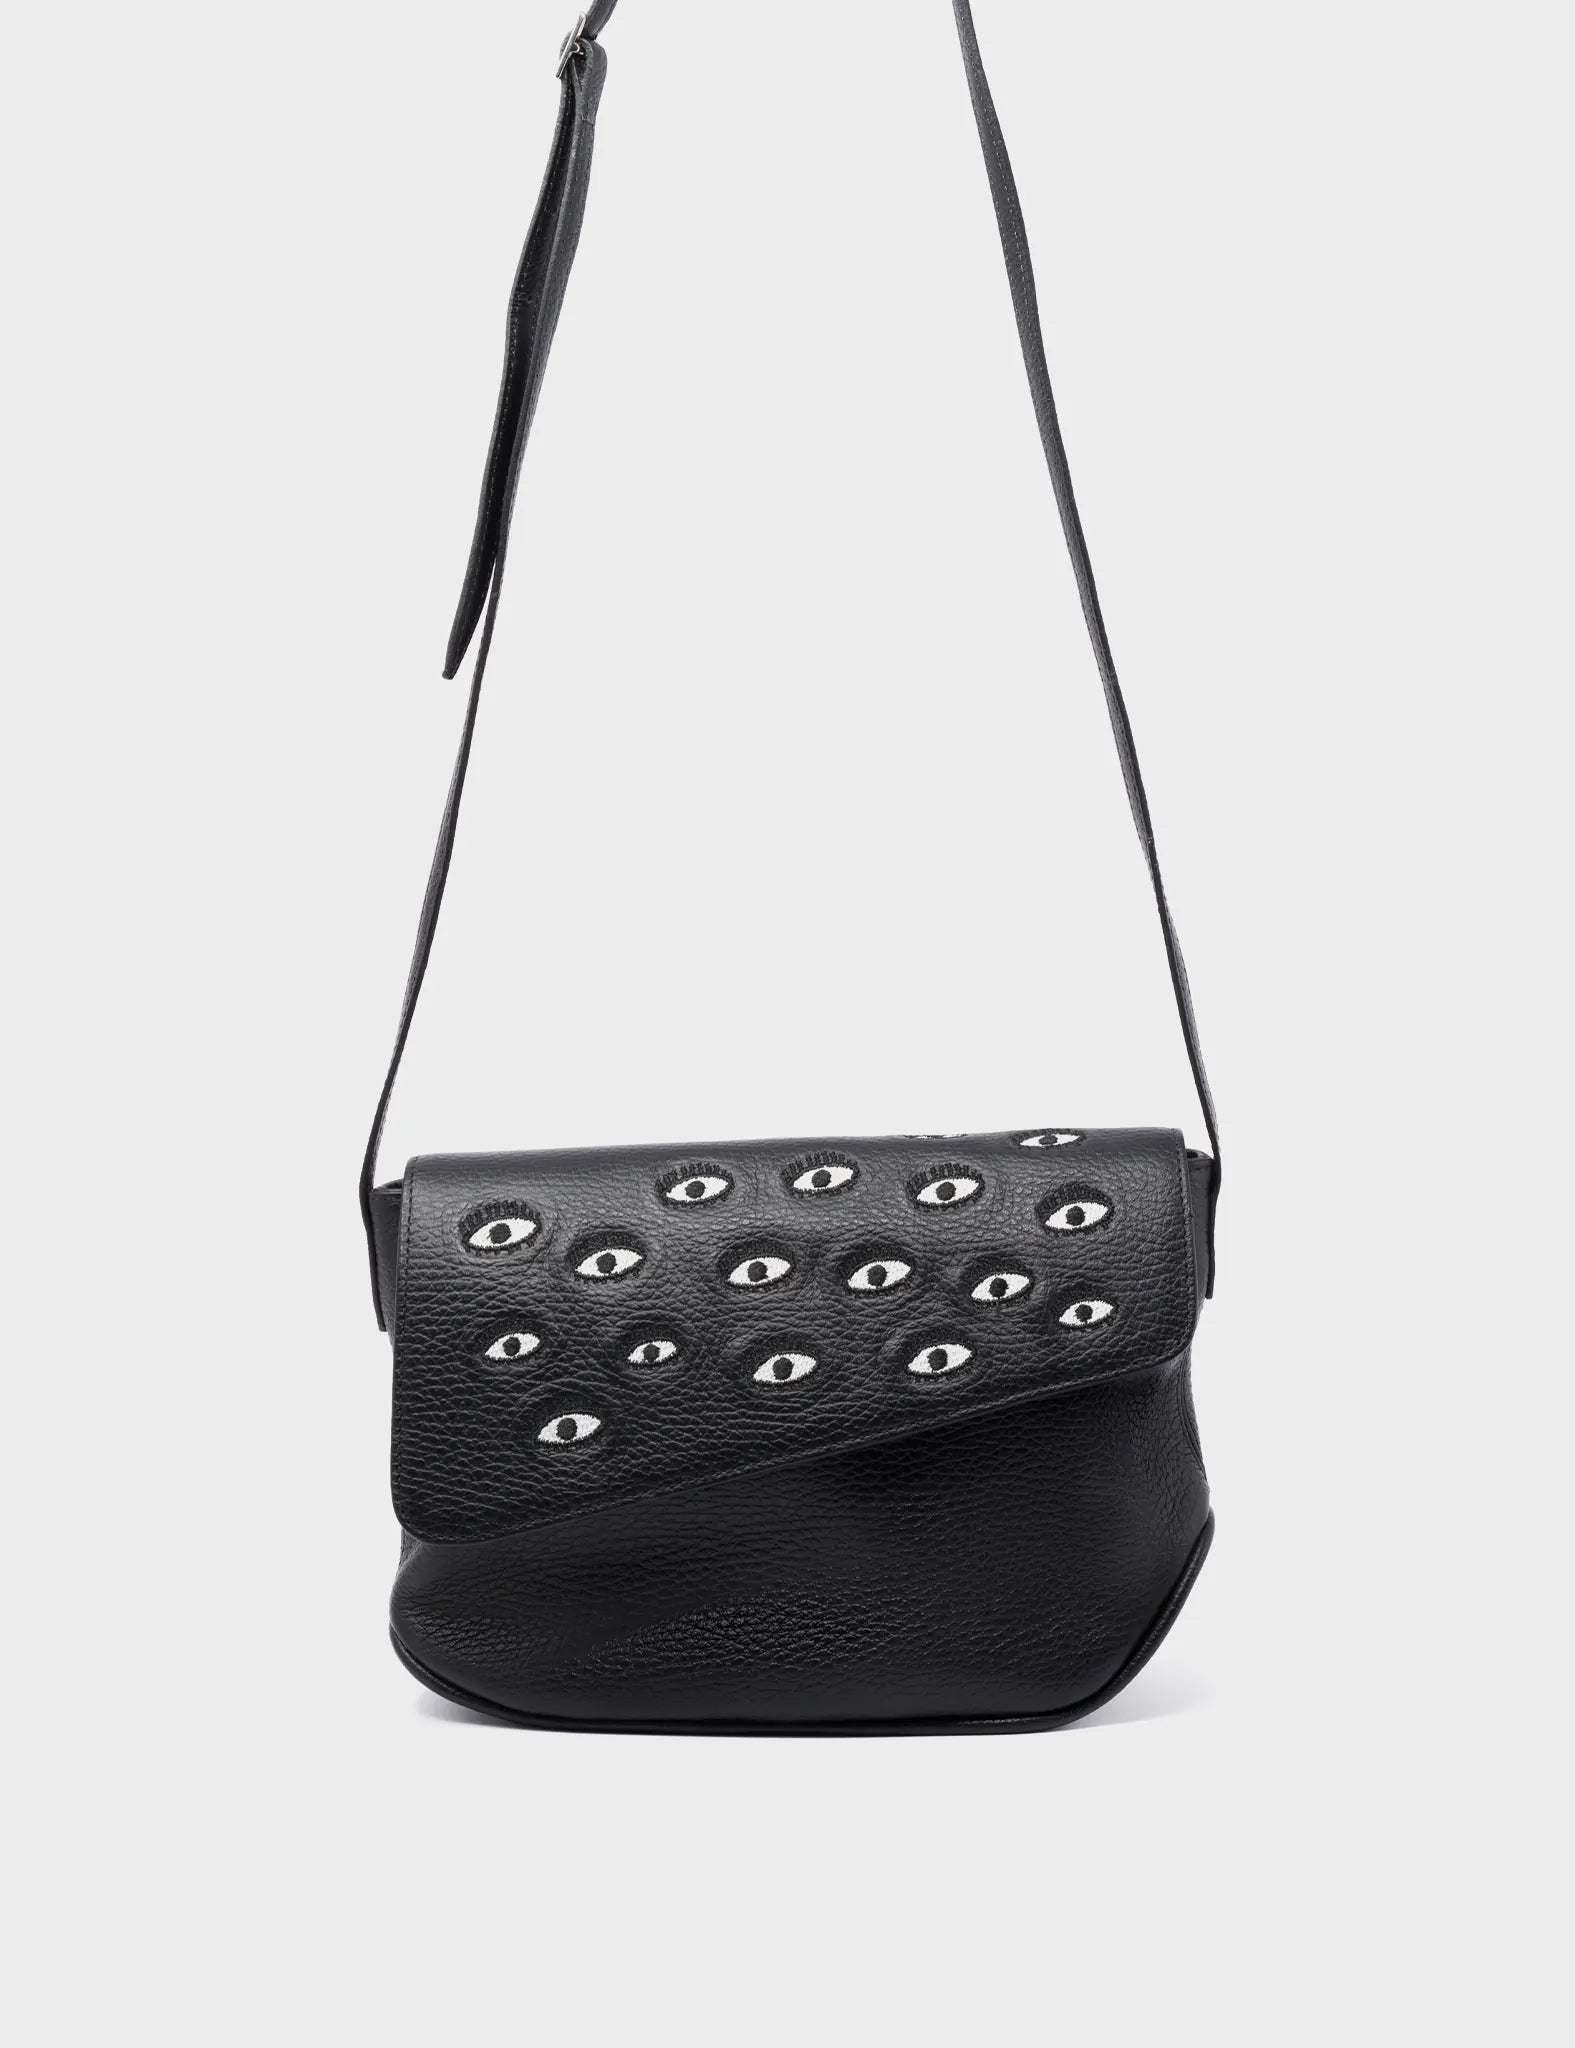 Bruno Mini Crossbody Black Leather Bag - All Over Eyes Embroidery 